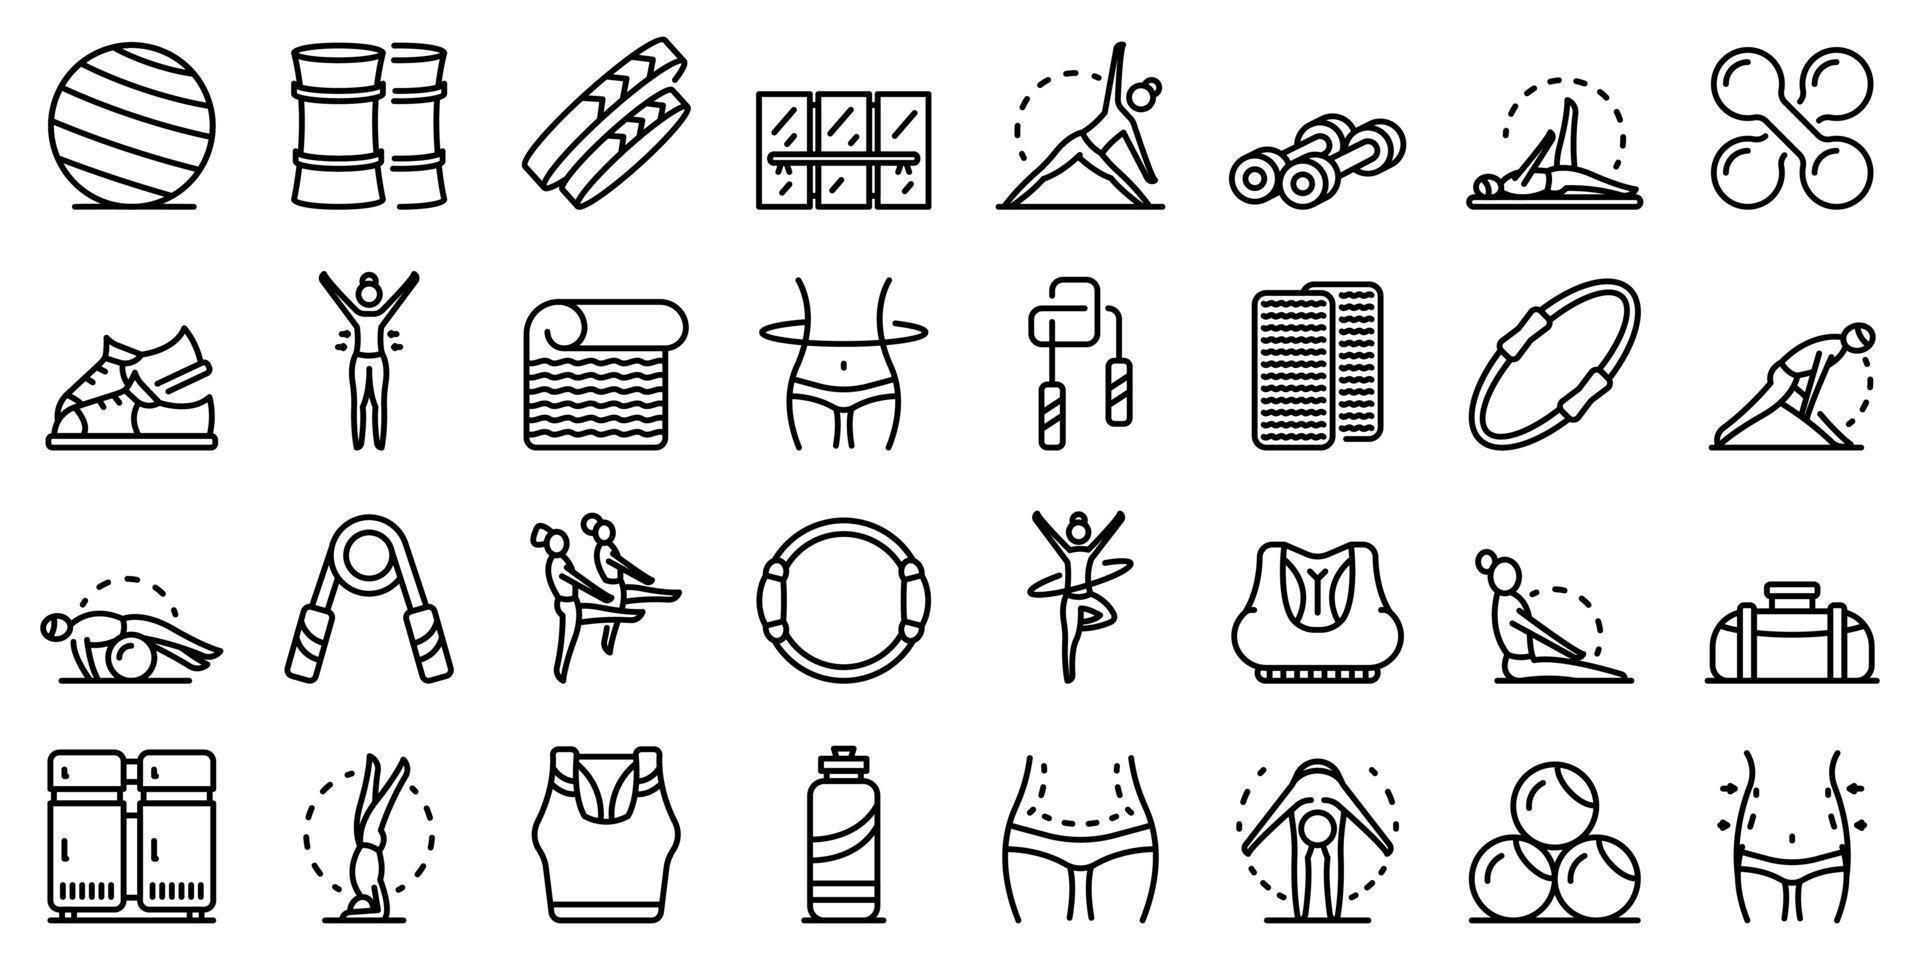 Pilates icons set, outline style vector